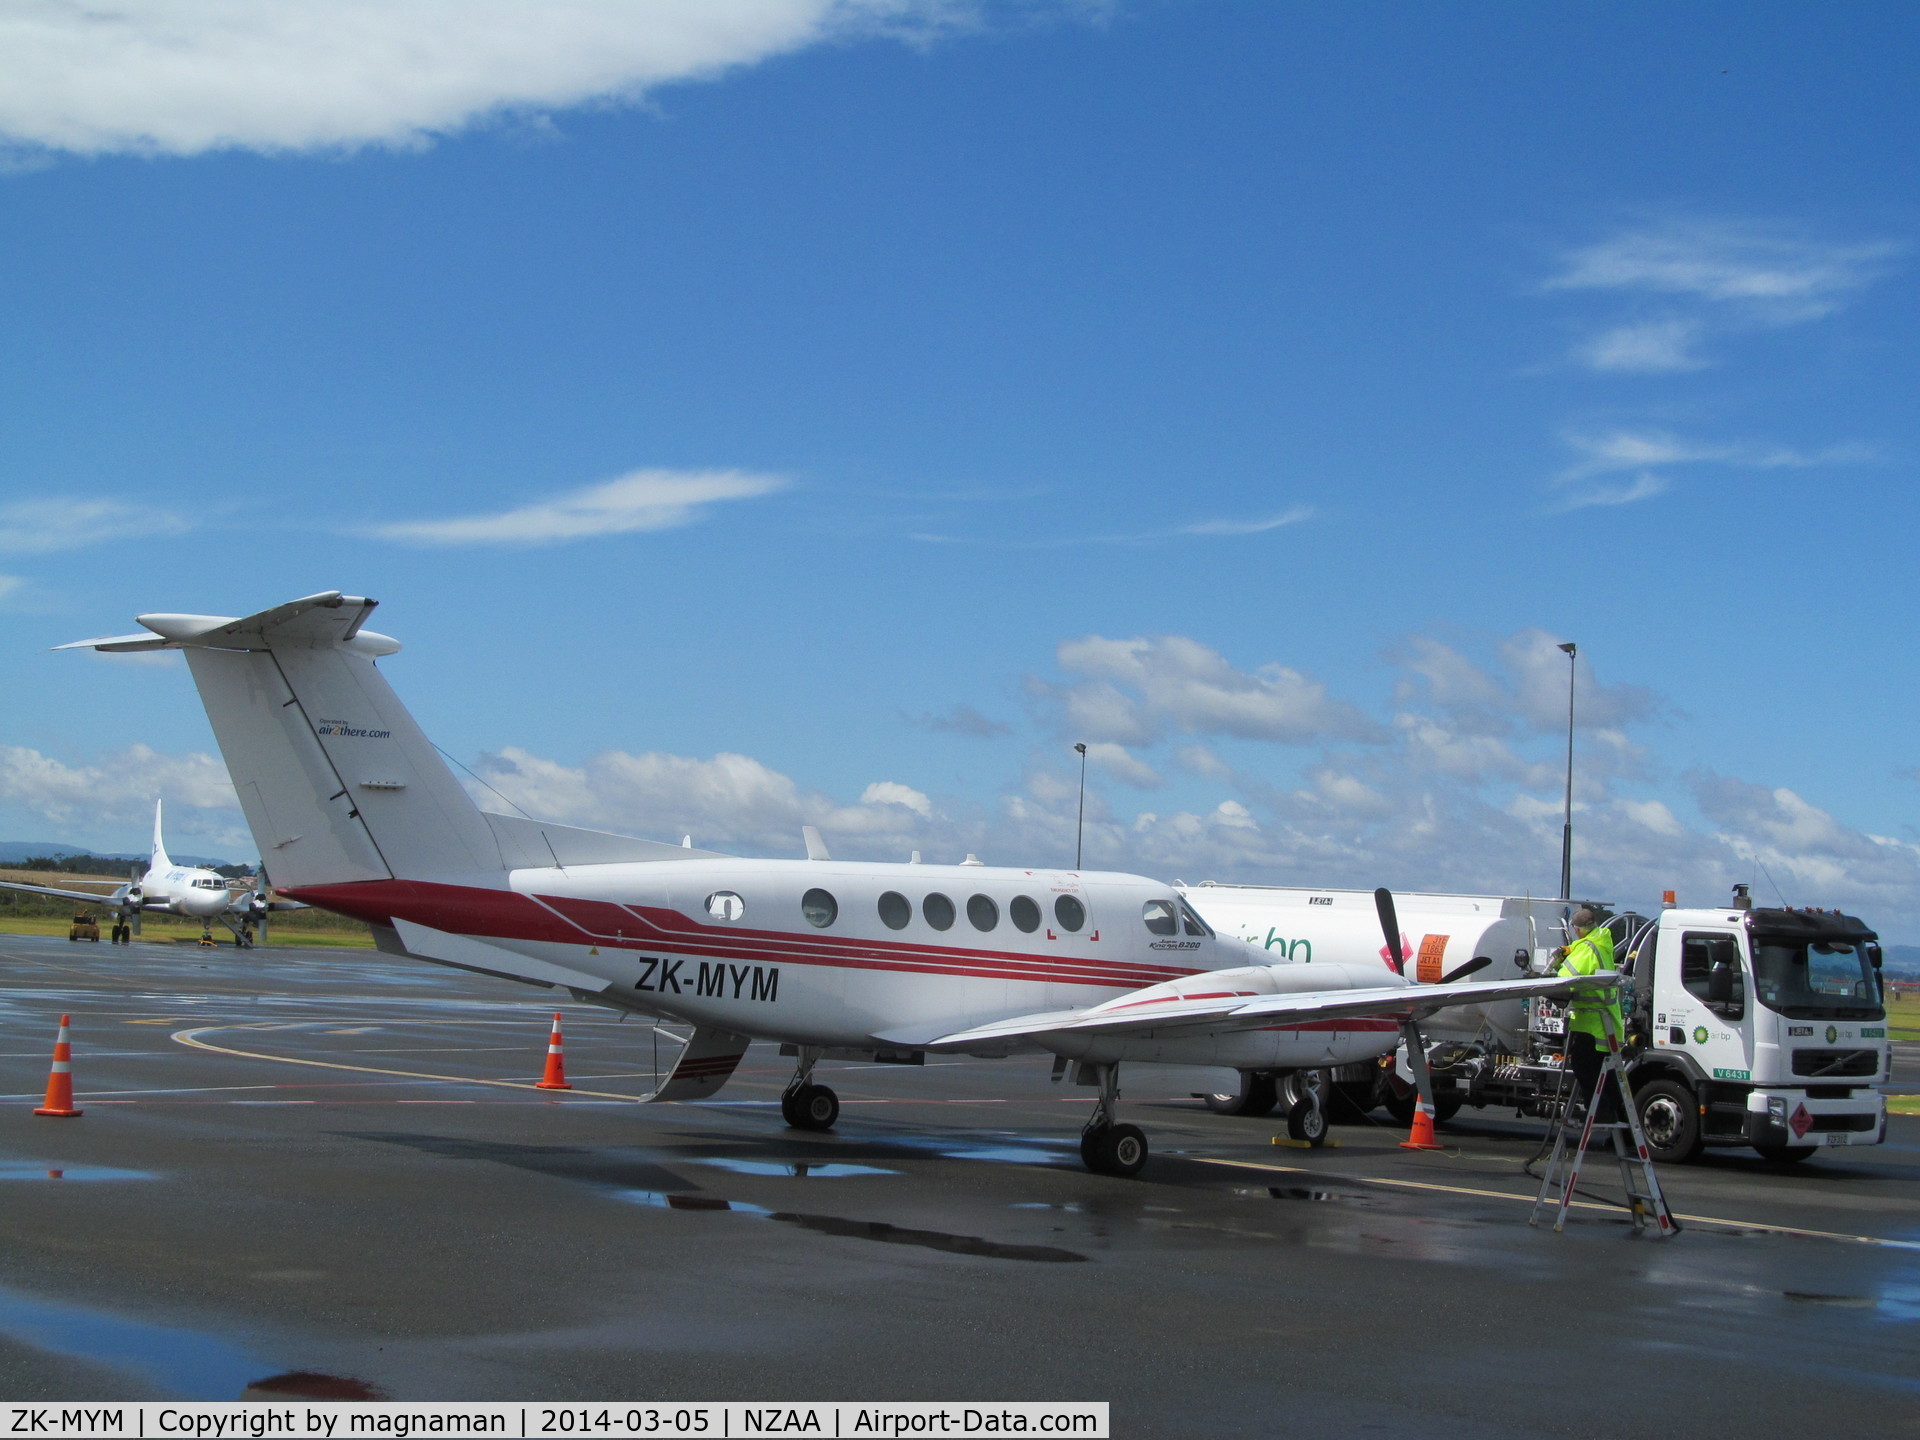 ZK-MYM, 1993 Beech B200 King Air C/N BB-1466, Seems to be a few beech type aircraft here in NZ. Nice lines.